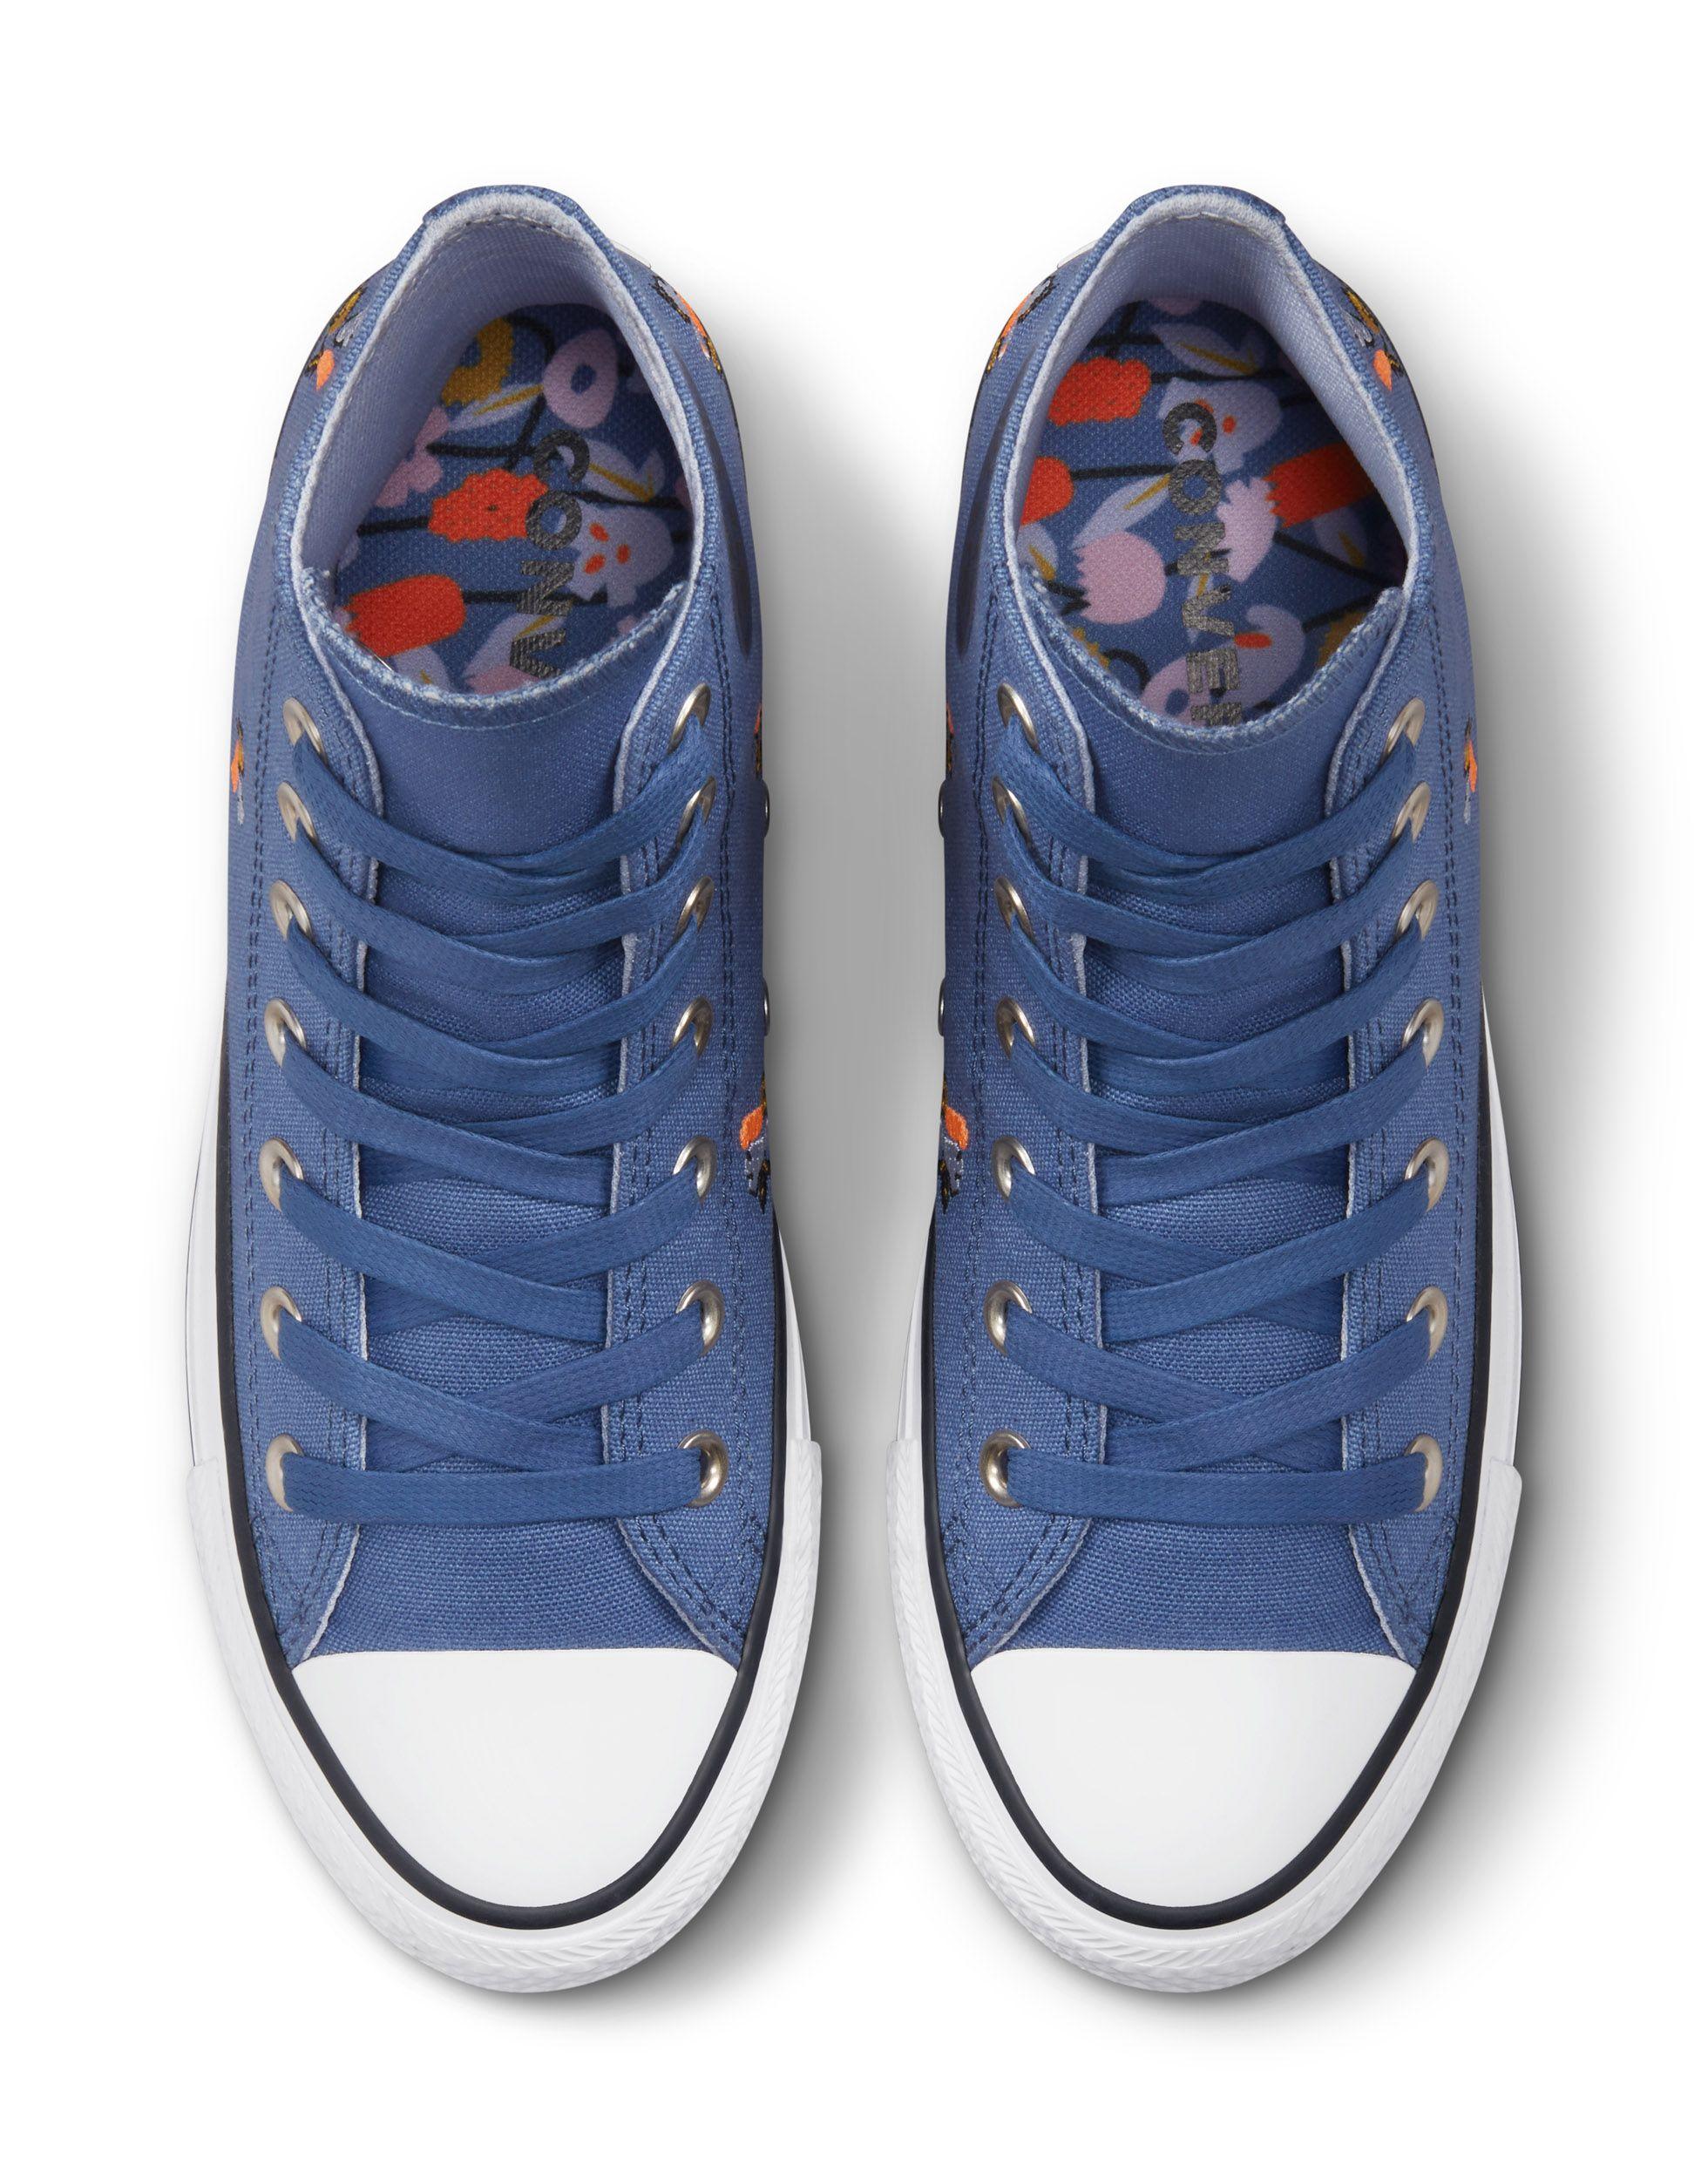 Converse Chuck Taylor All Star Hi Women's History Month Washed Canvas  Sneakers in Blue | Lyst